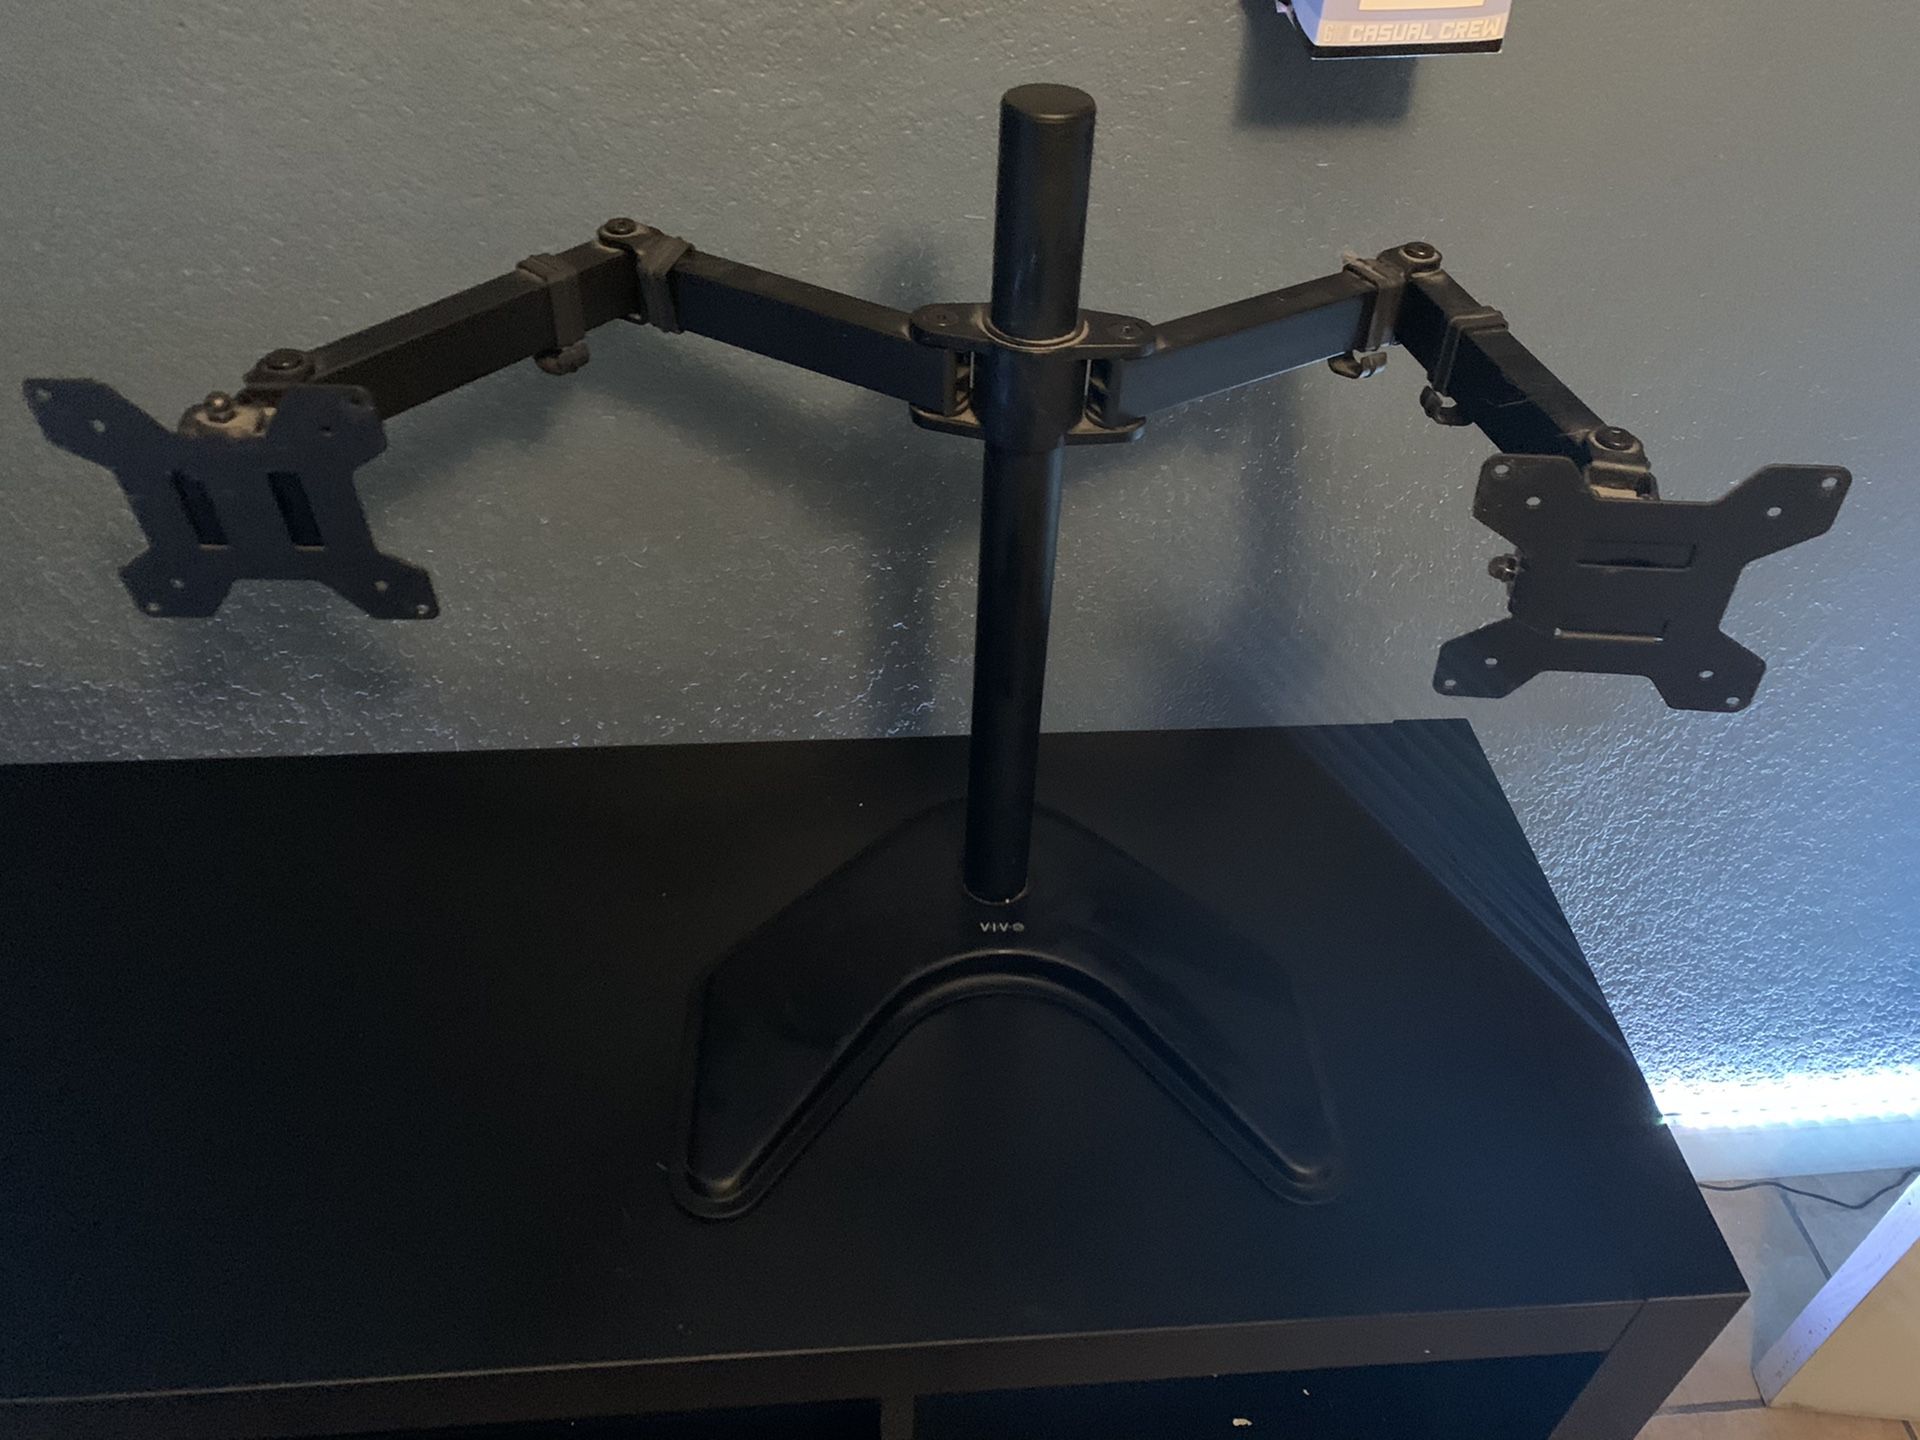 Dual Monitor Stand